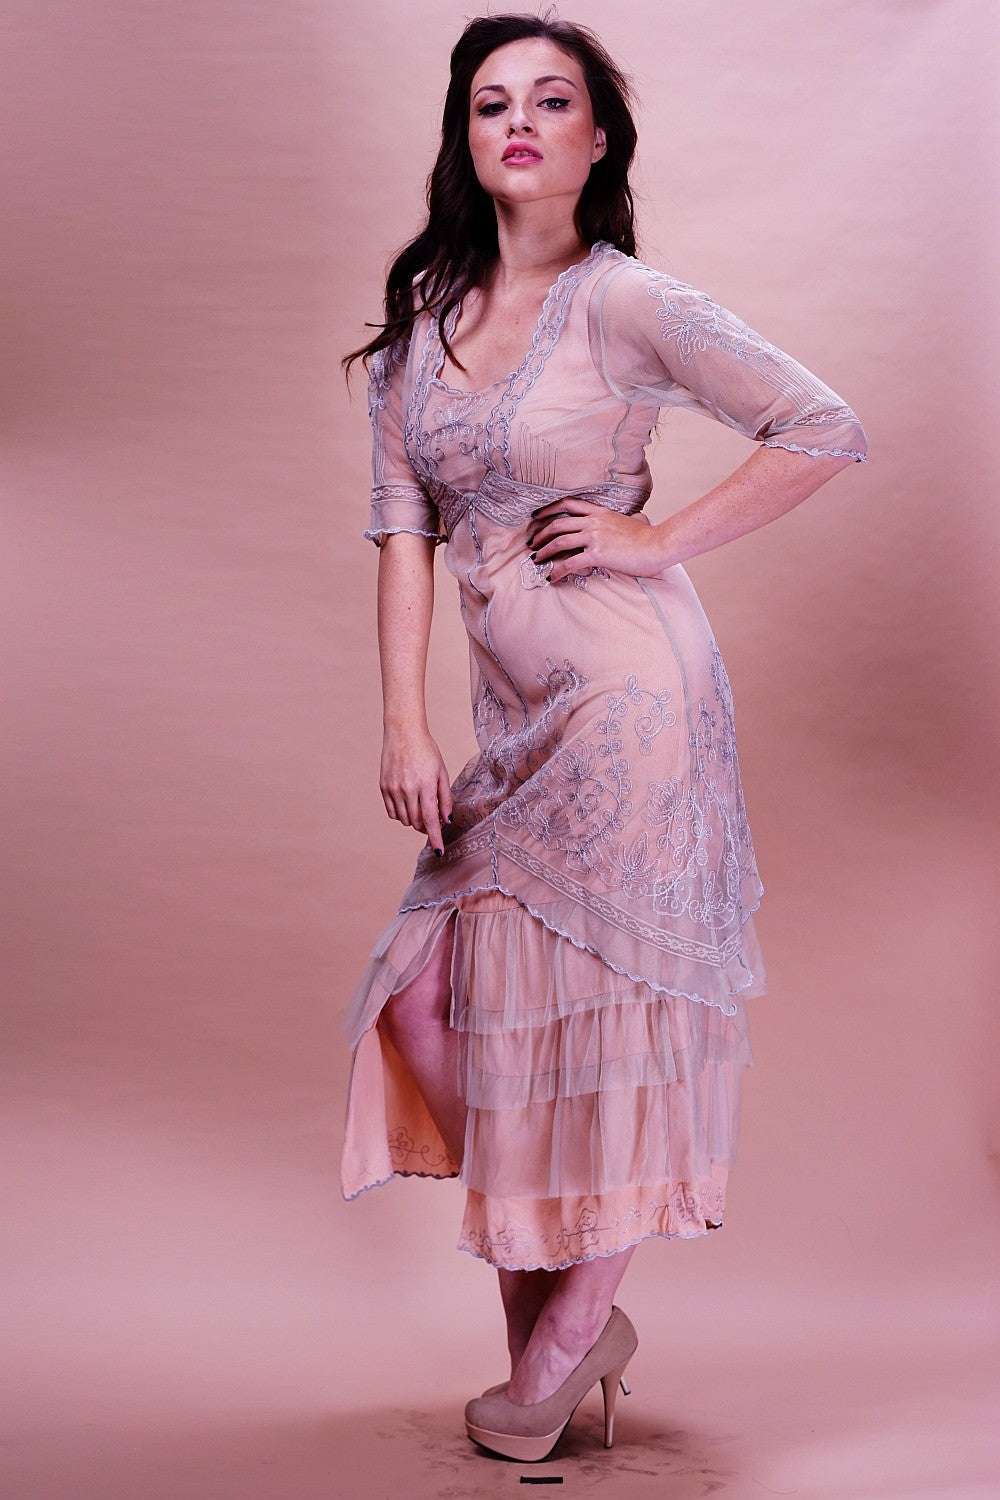 Titanic Tea Party Dress in Antique Pink by Nataya